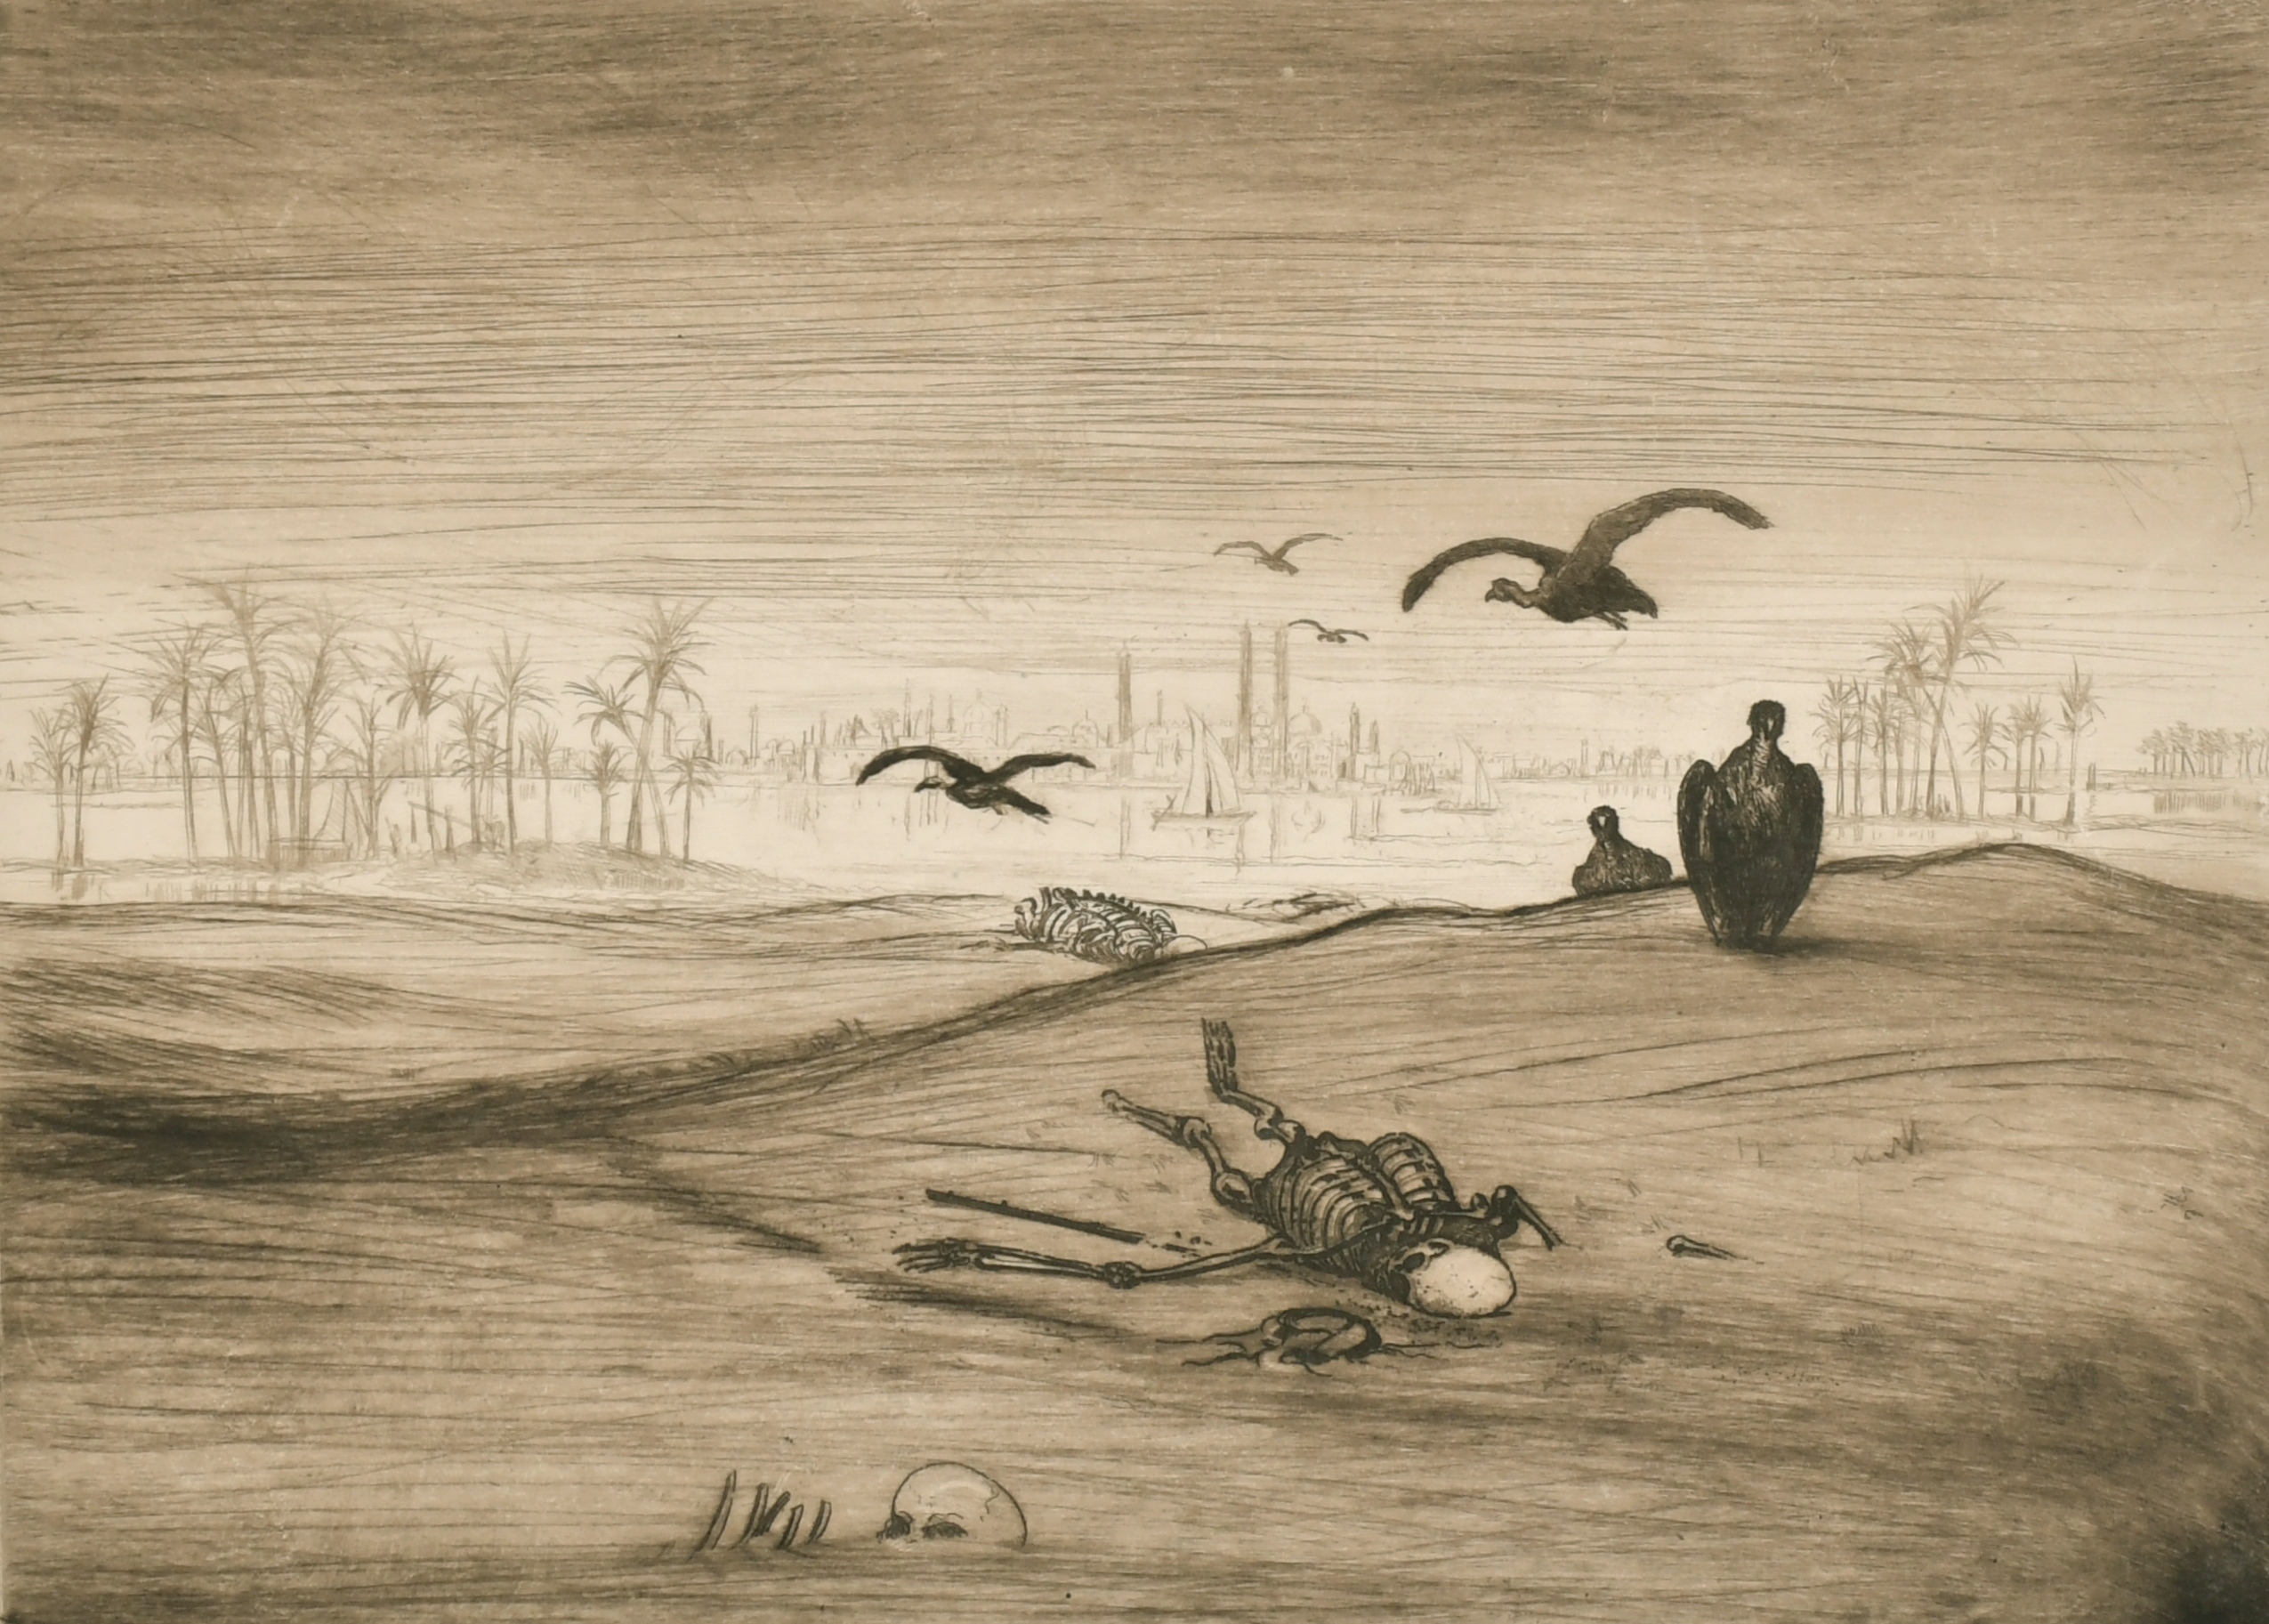 E. J. Burrow (19th ? 20th Century) British. A Desert Scene with Skeletons and Vultures, Etching,